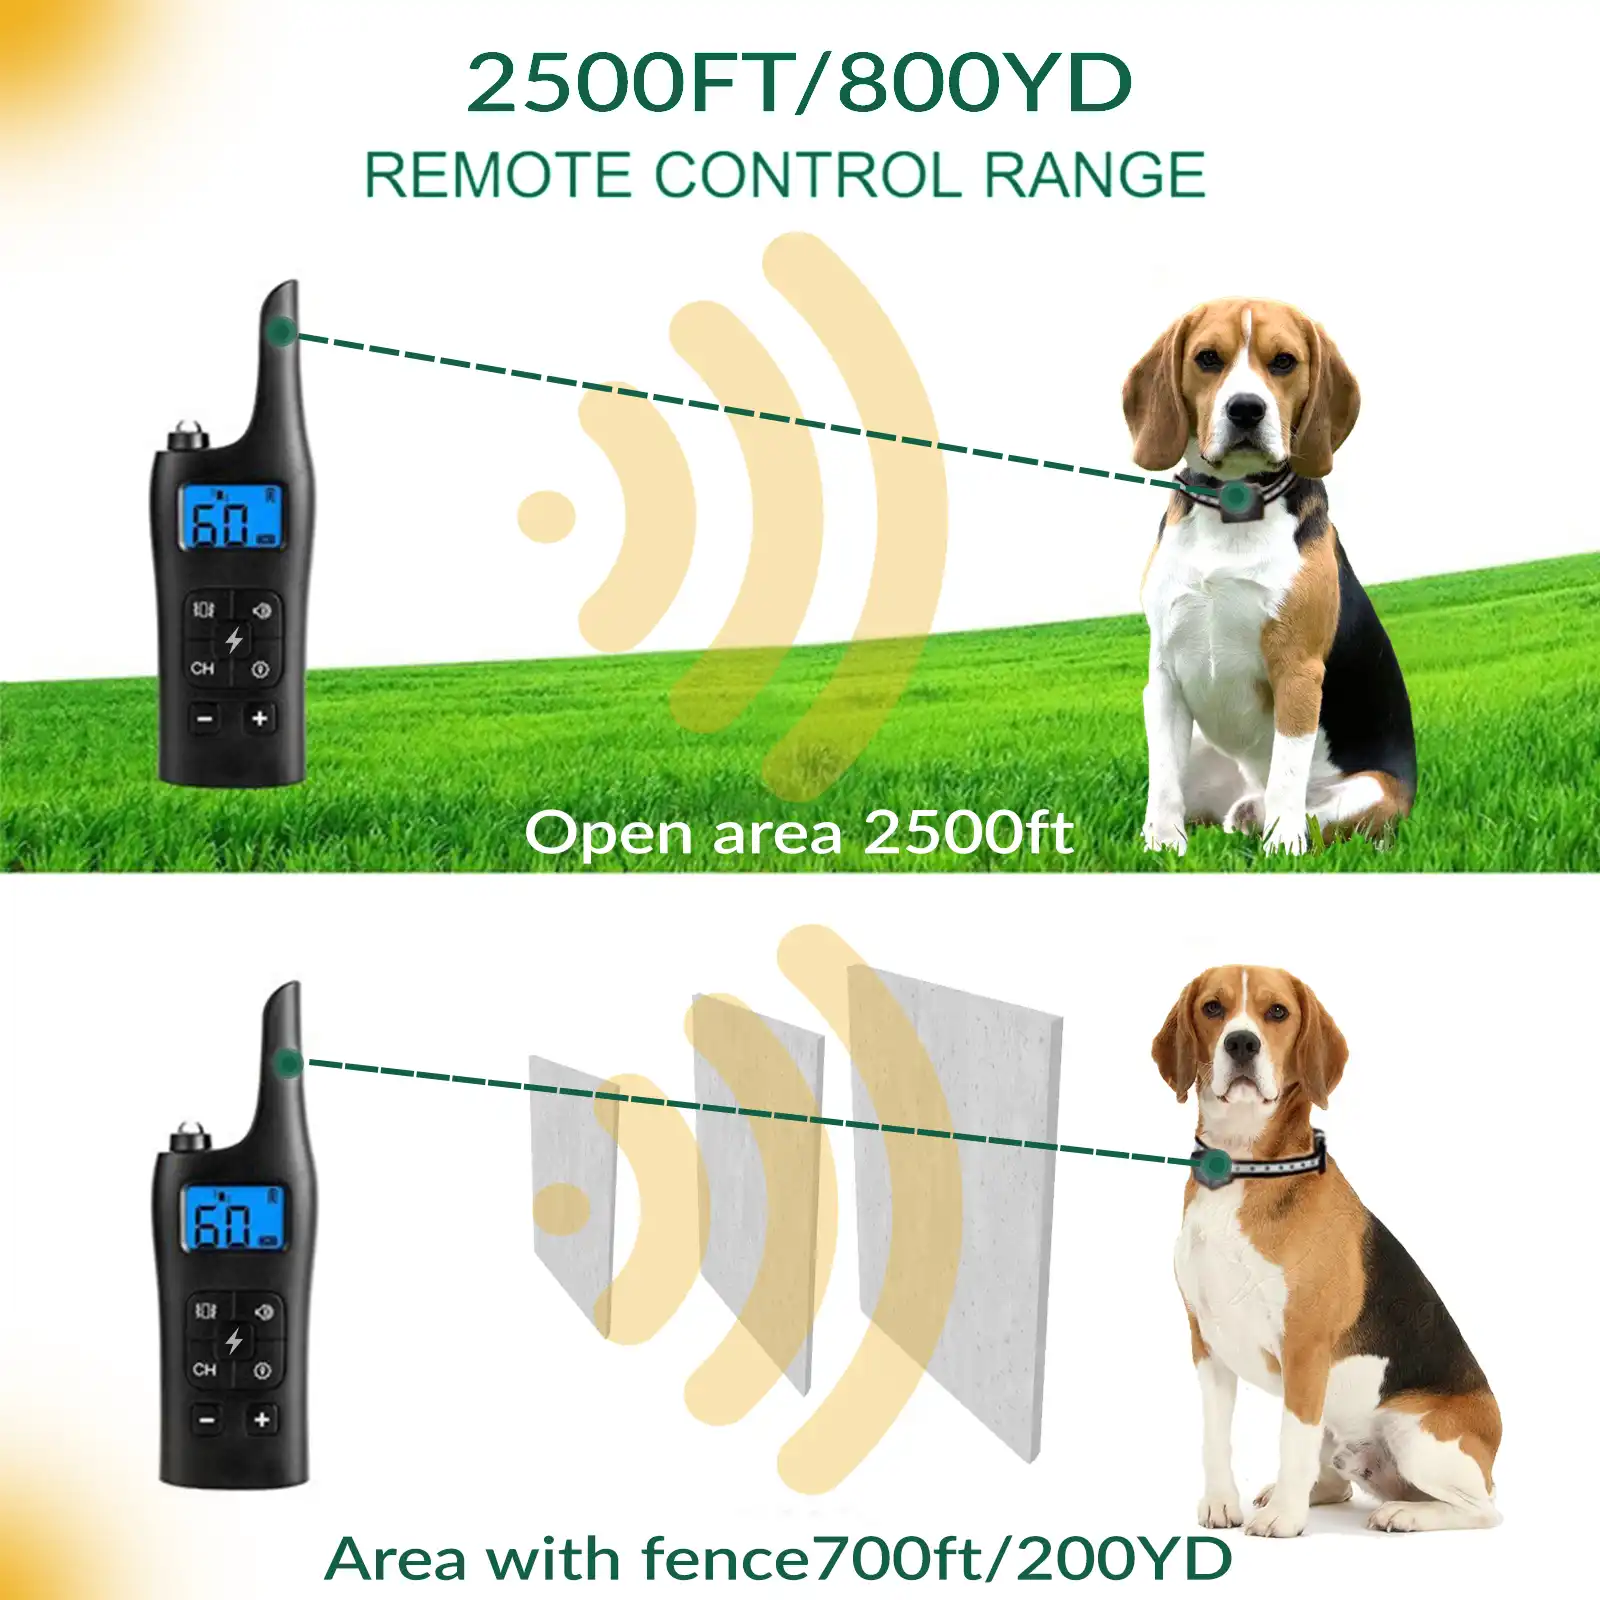 5 Level for Shock/Vibration Beep Petech Dog Training Collar for 2 dogs Rechargeable Training Collar Cordless Bark Collar with Three Modes 1000ft Remote Range Vibration and Shock 100% Waterproof